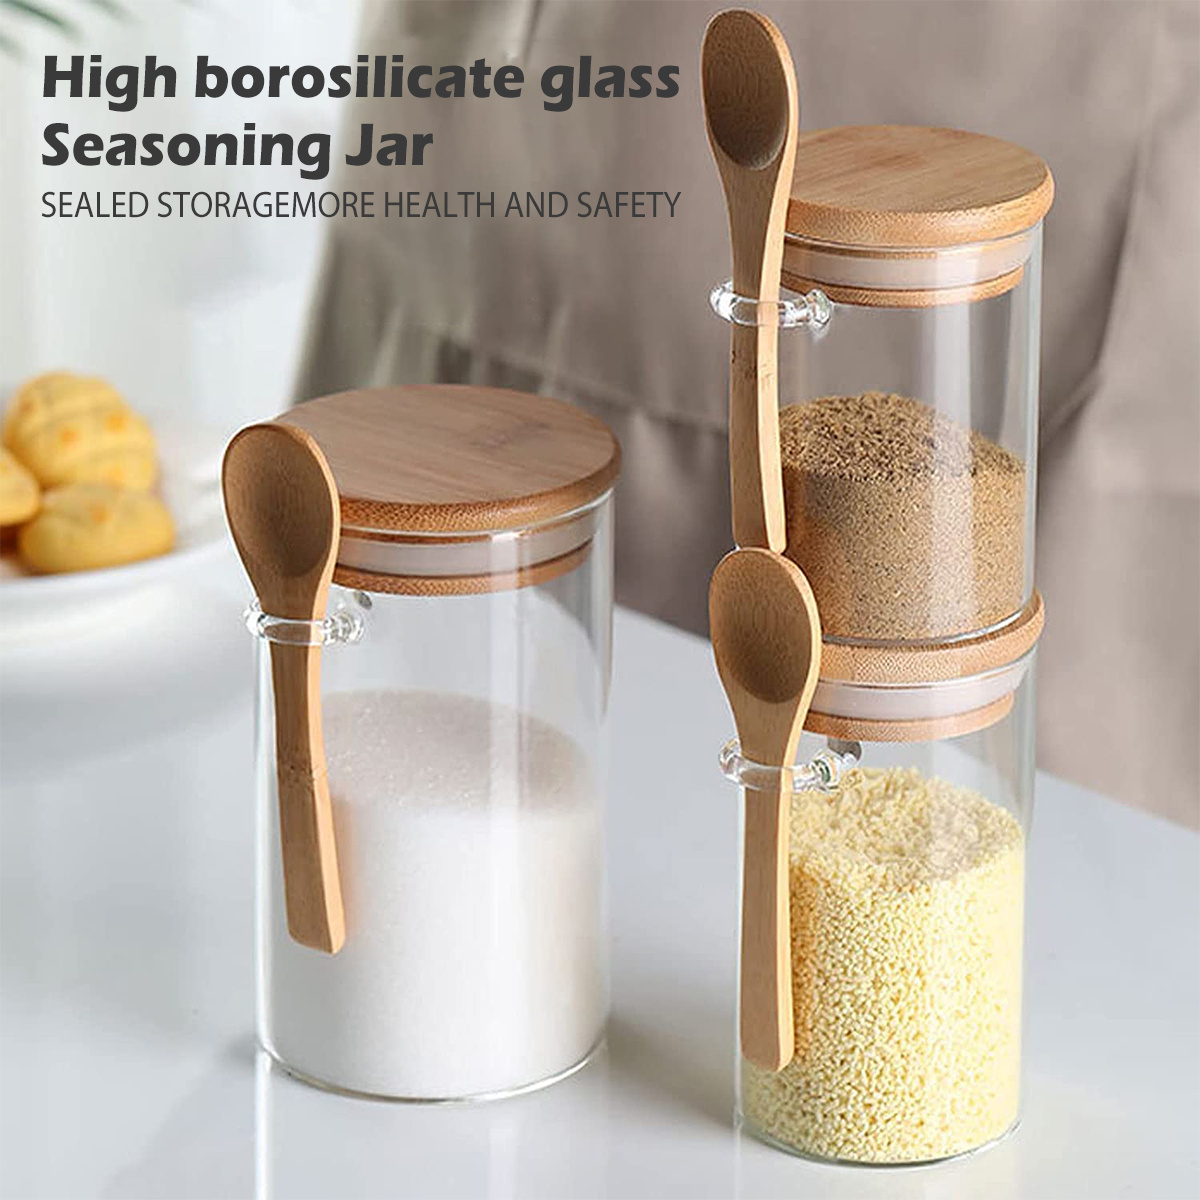 Set of 2 Airtight Glass Jars with Bamboo Lids & Bamboo Spoons - Decorative  & Durable 17-Oz Borosilicate Glass Canisters Hold Coffee Beans, Tea, Flour